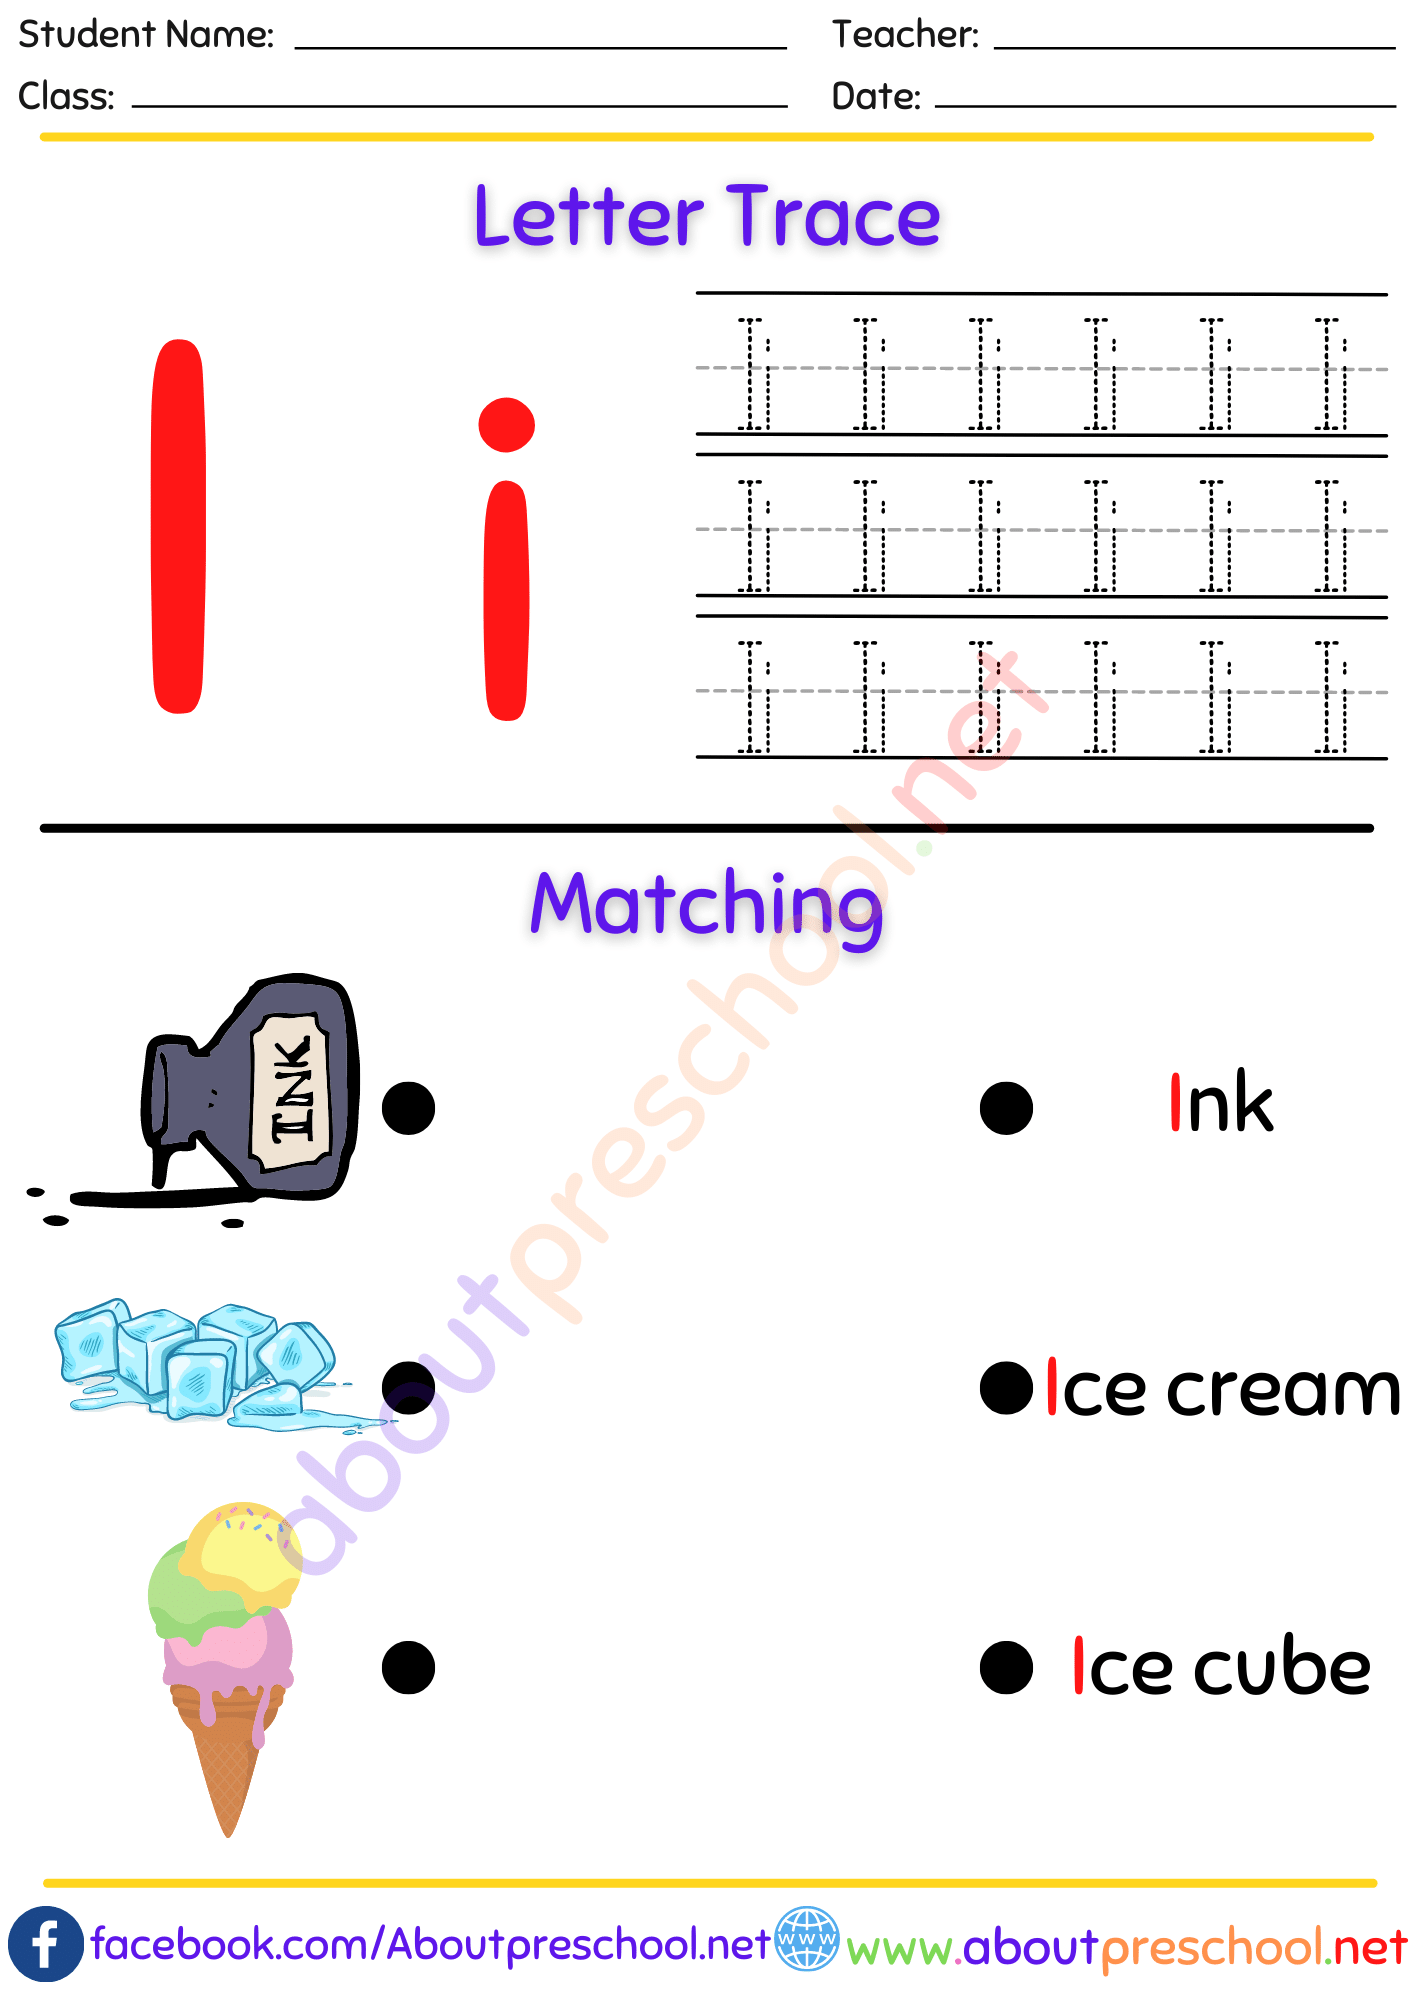 Letter Trace and Matching I